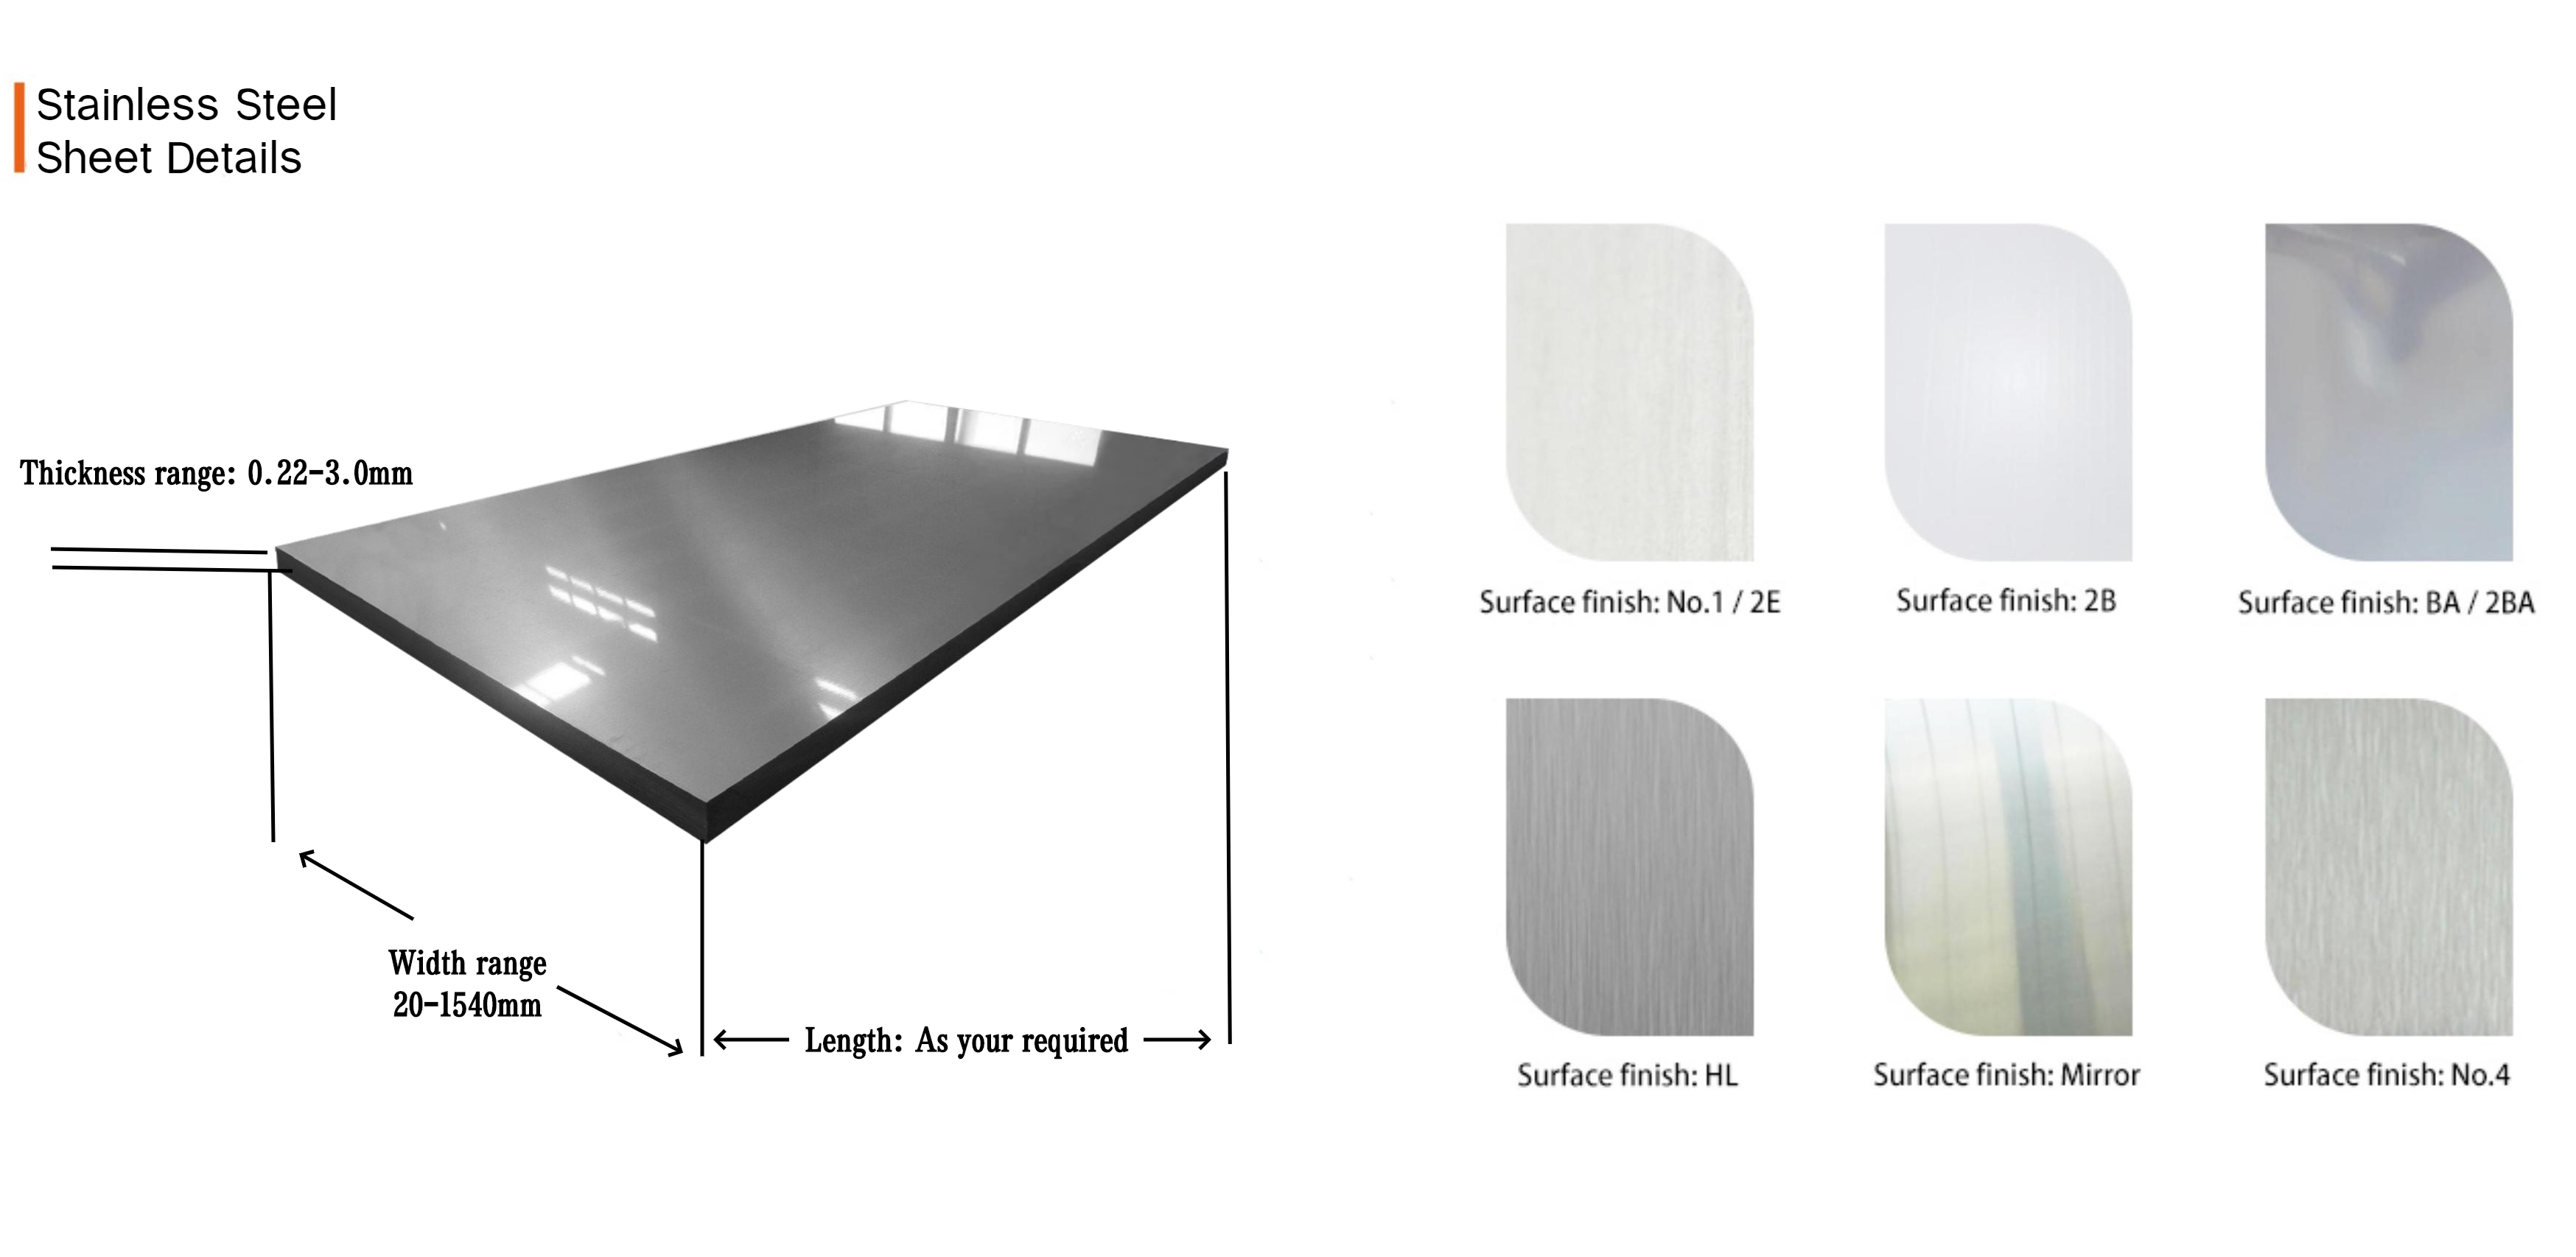 stainless steel sheet details